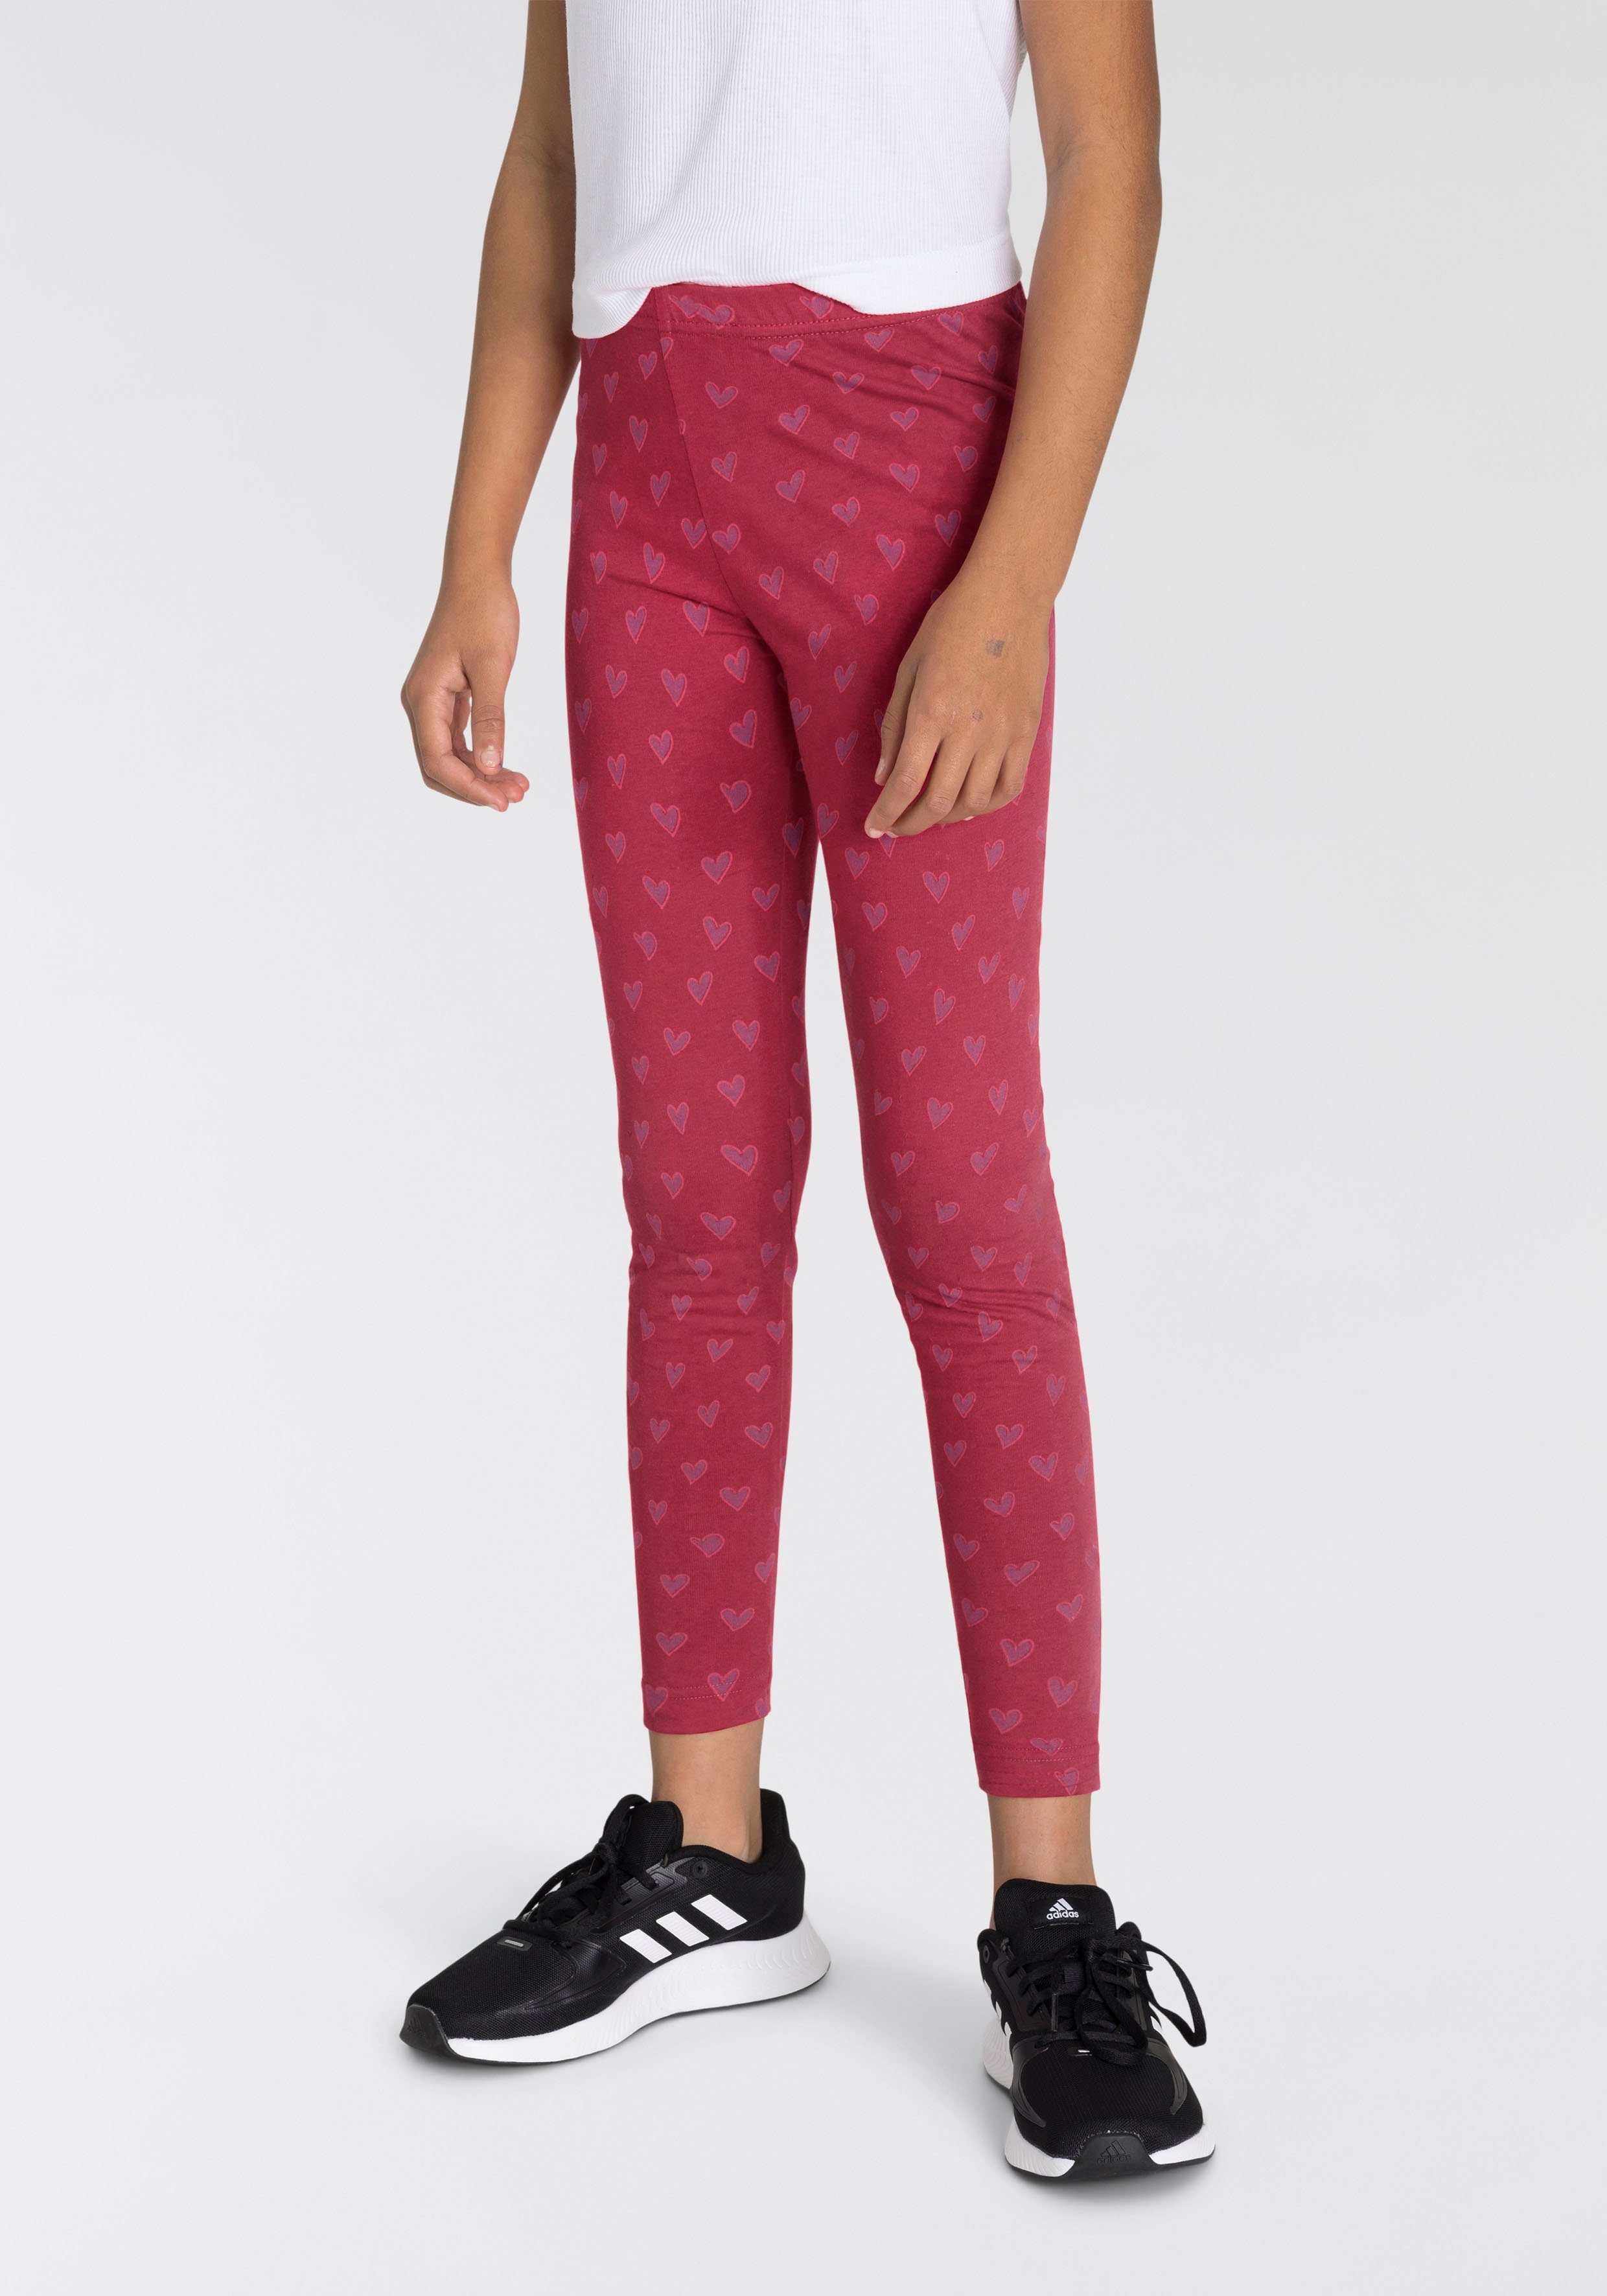 Scout Leggings SPORTY (Packung, marine, 2er-Pack) rot